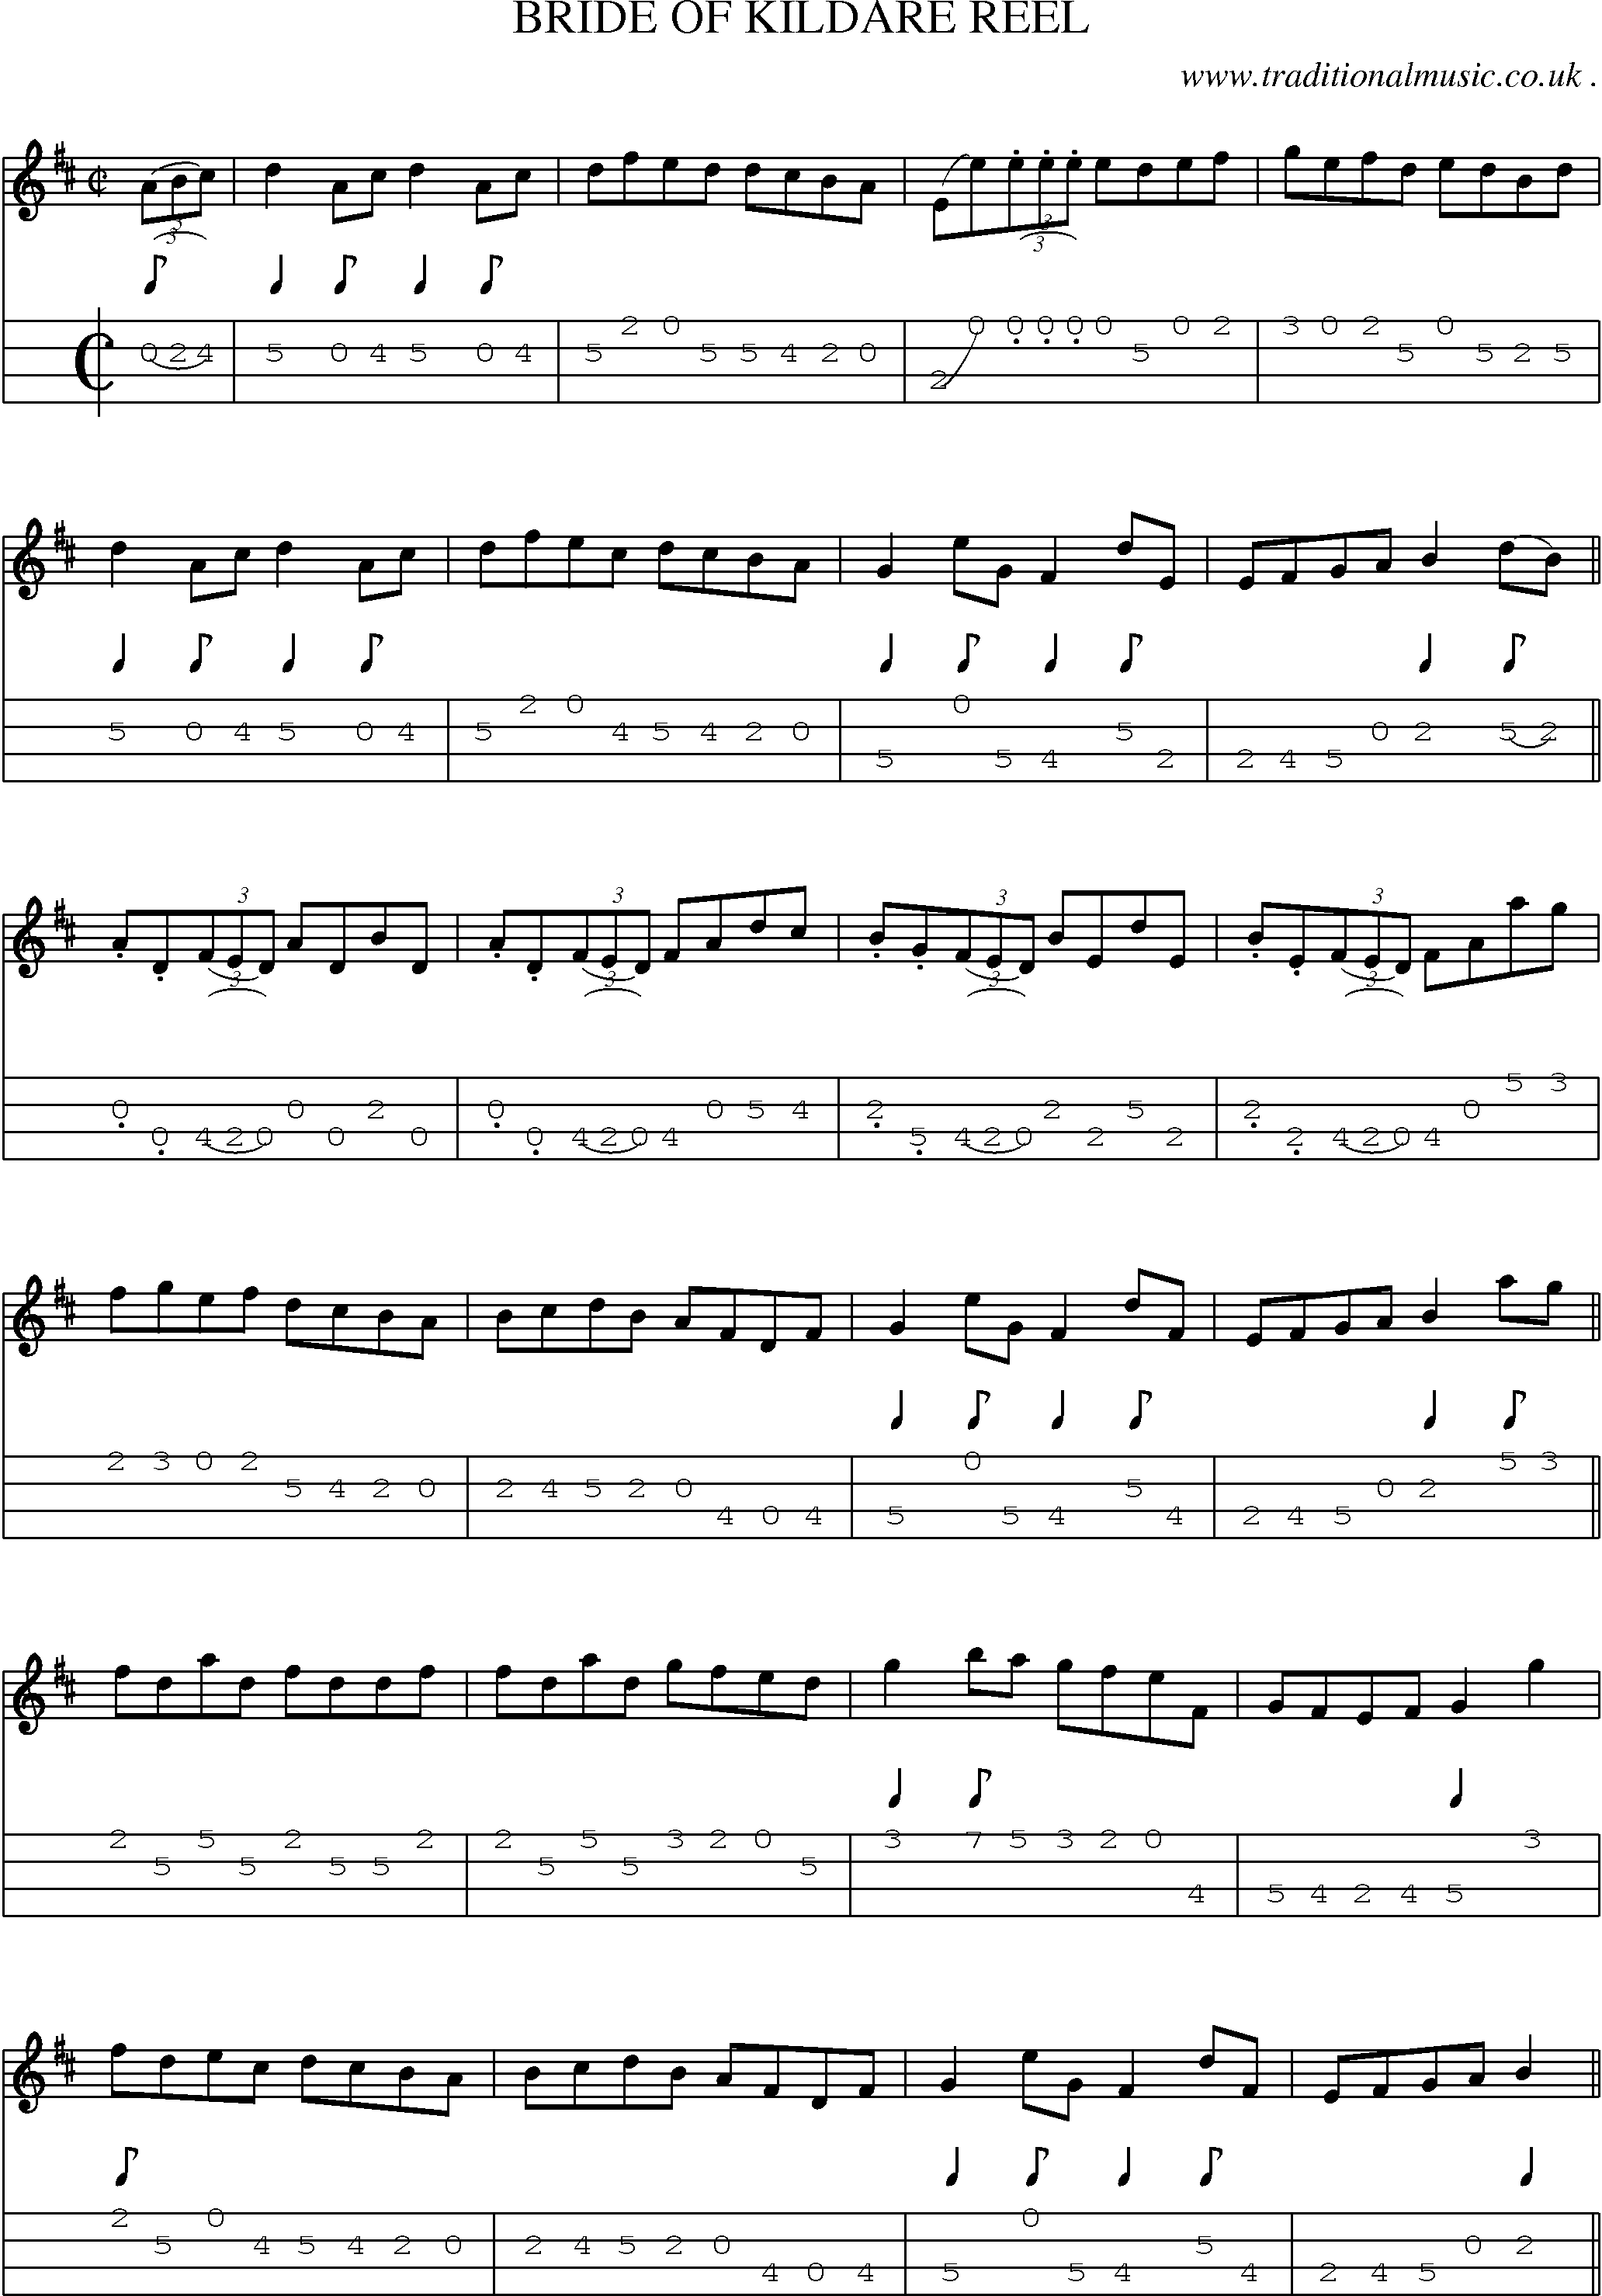 Sheet-Music and Mandolin Tabs for Bride Of Kildare Reel